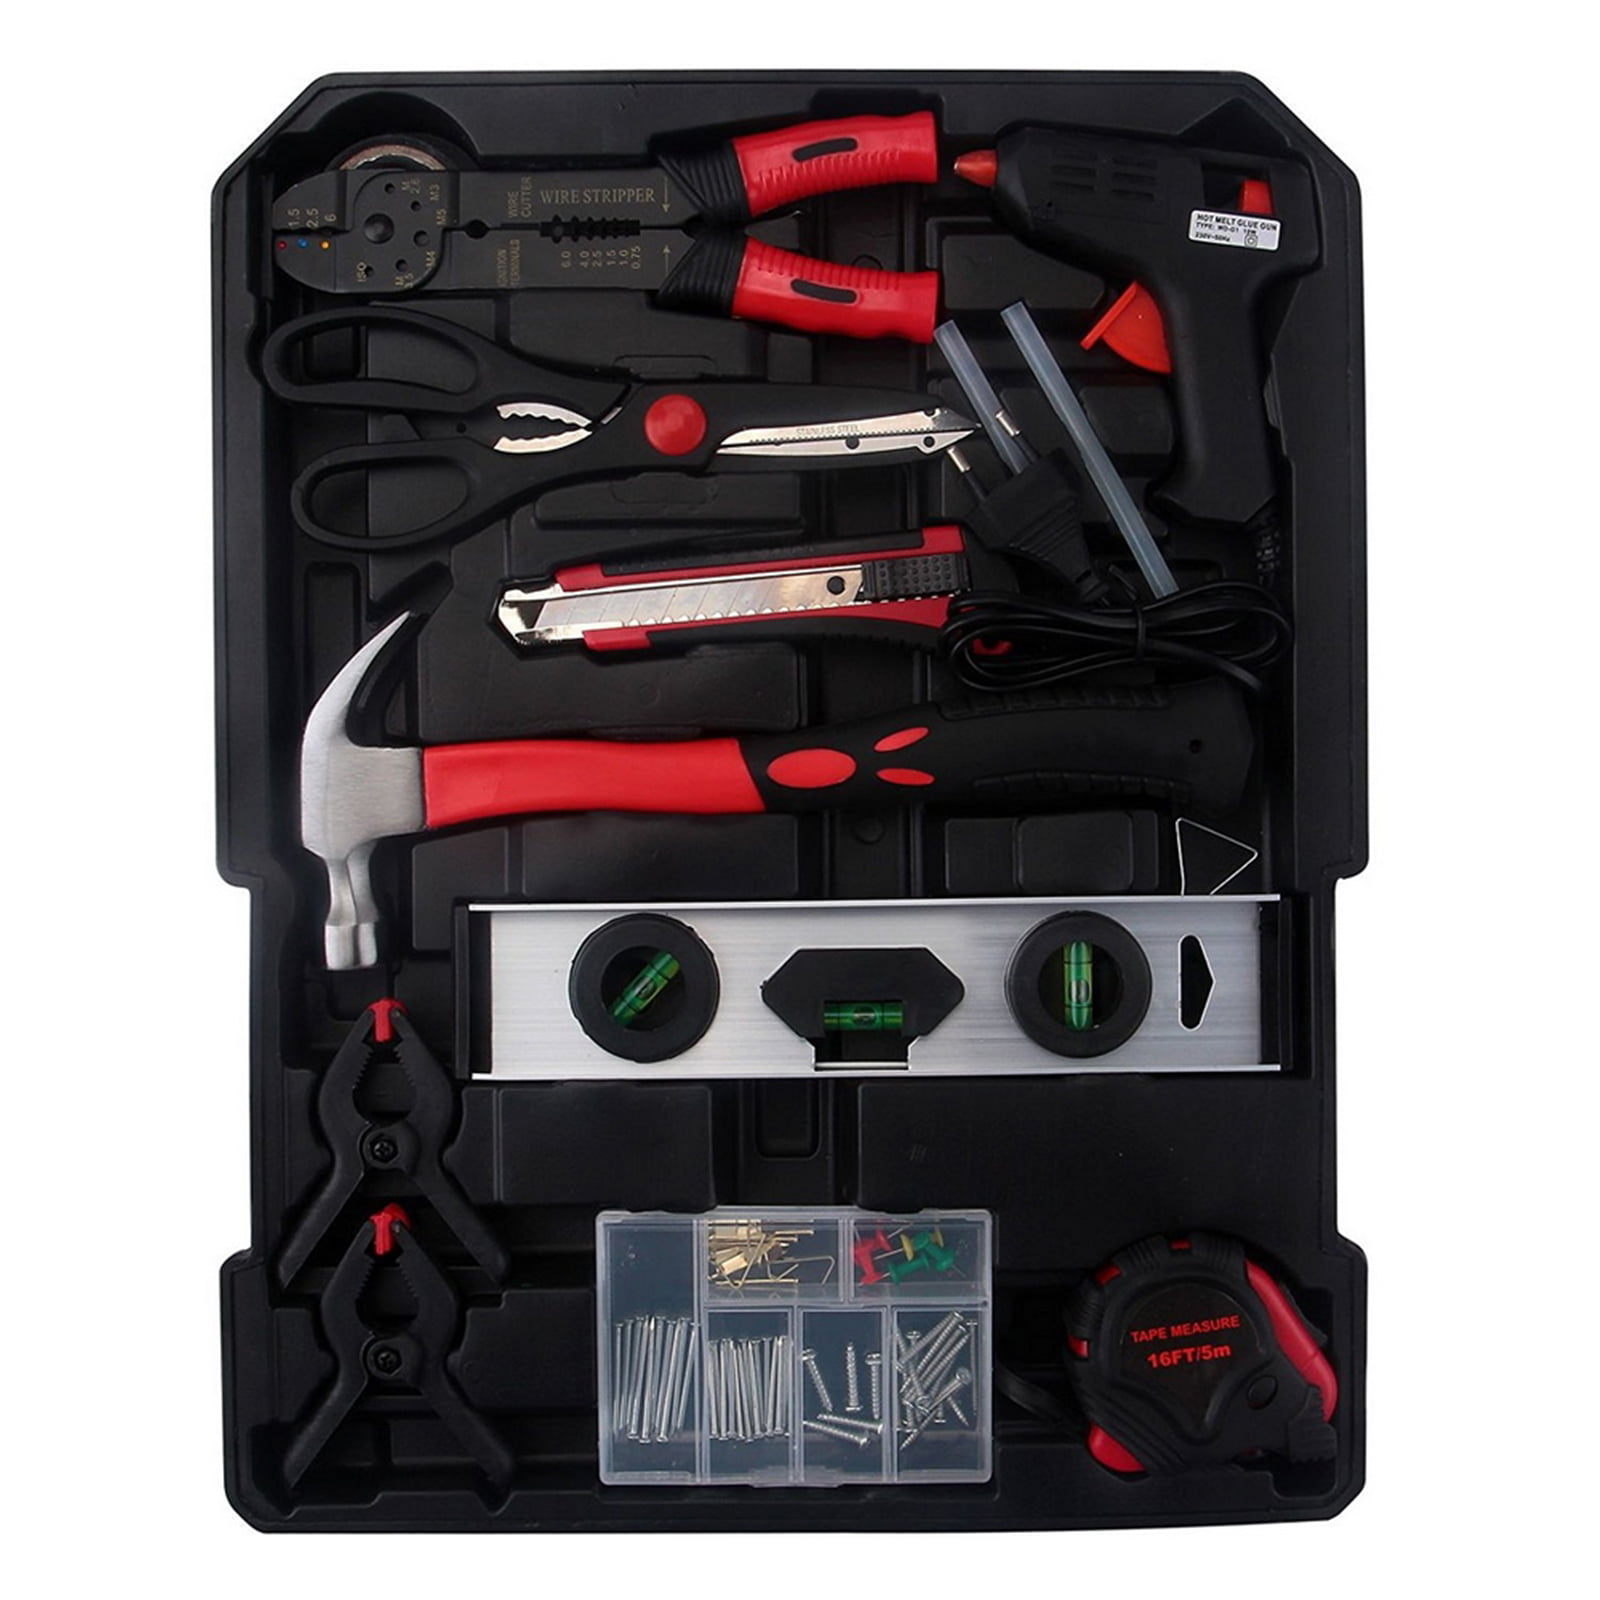 339-Piece Mechanics Tool Set - Universal Professional Tool Kit with Metal  Case Box, 3-Drawer Tool Box With Tools, Socket Wrench Sets, Screwdriver Sets,  for Workshop Warehouse Repair Shop 